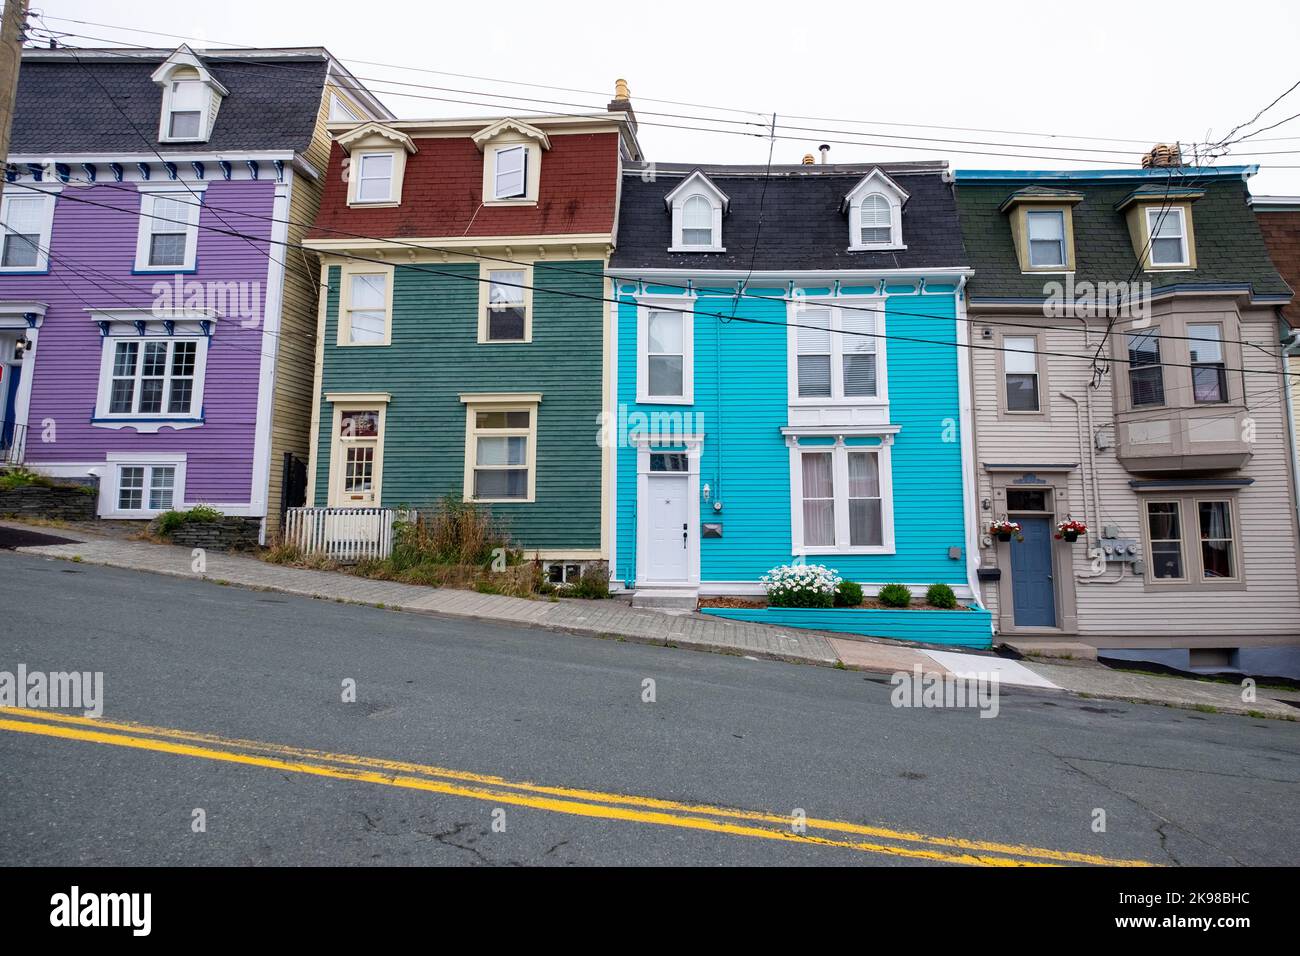 St. John's, Newfoundland, Canada-October 2022:Brightly colored wooden row houses with a blue sky in the background. The three story houses are colorful Stock Photo